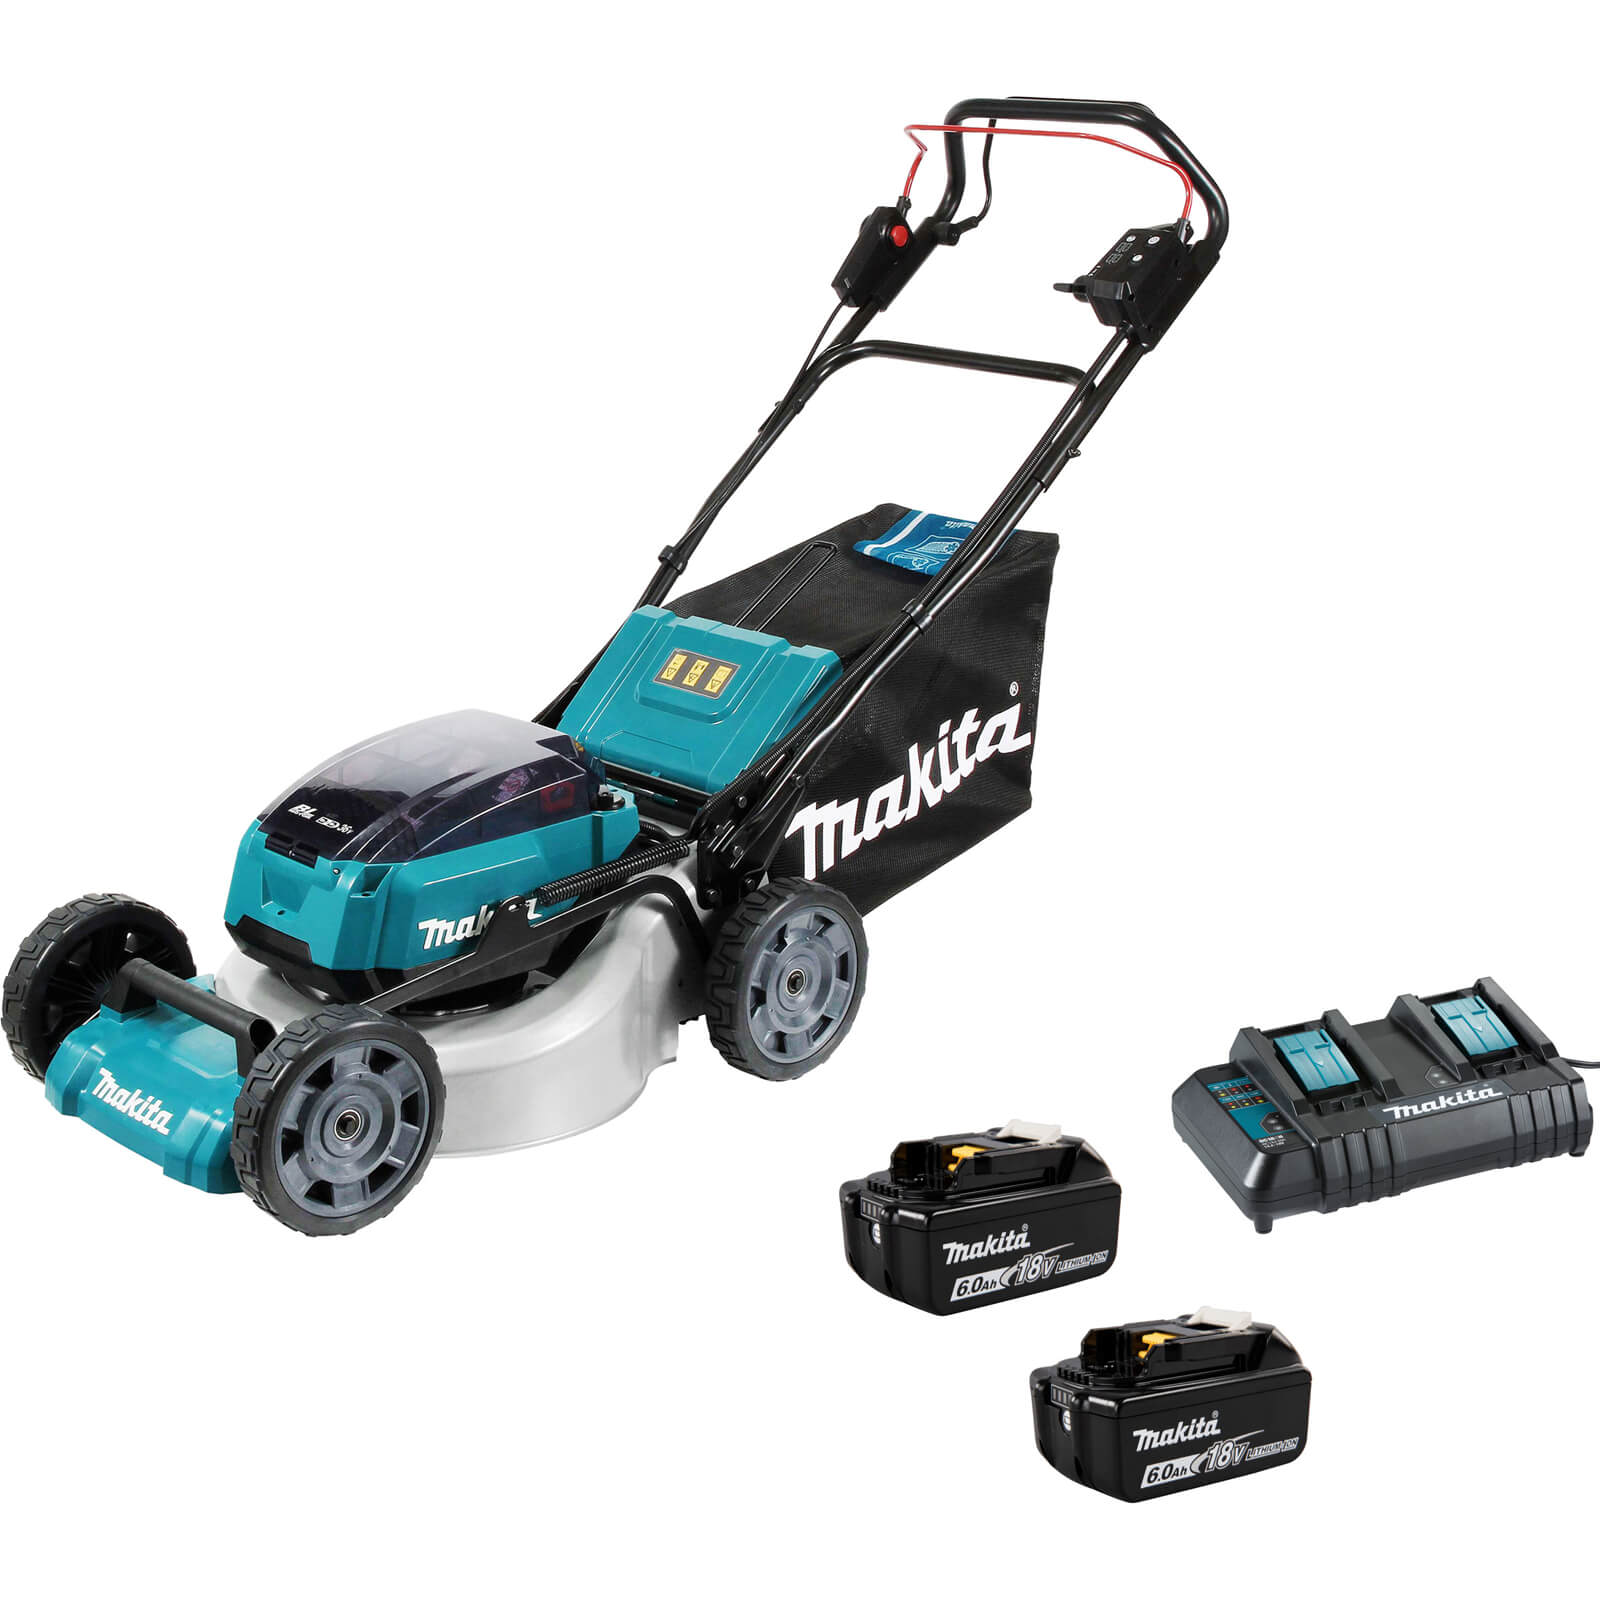 Image of Makita DLM462 Twin 18v LXT Cordless Brushless Lawnmower 460mm 2 x 6ah Li-ion Charger